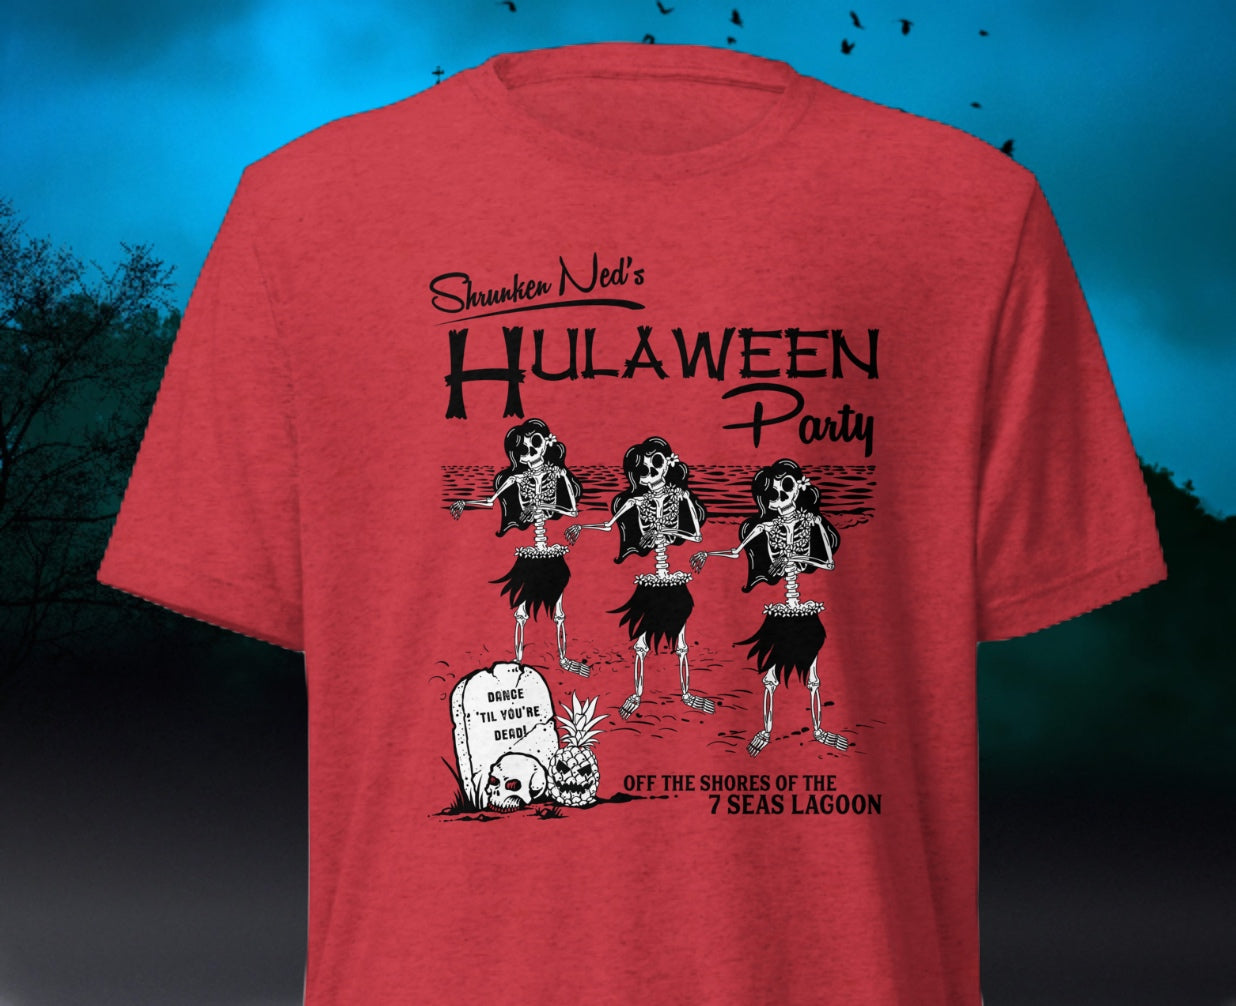 Hulaween Party Shirt - Park Candy